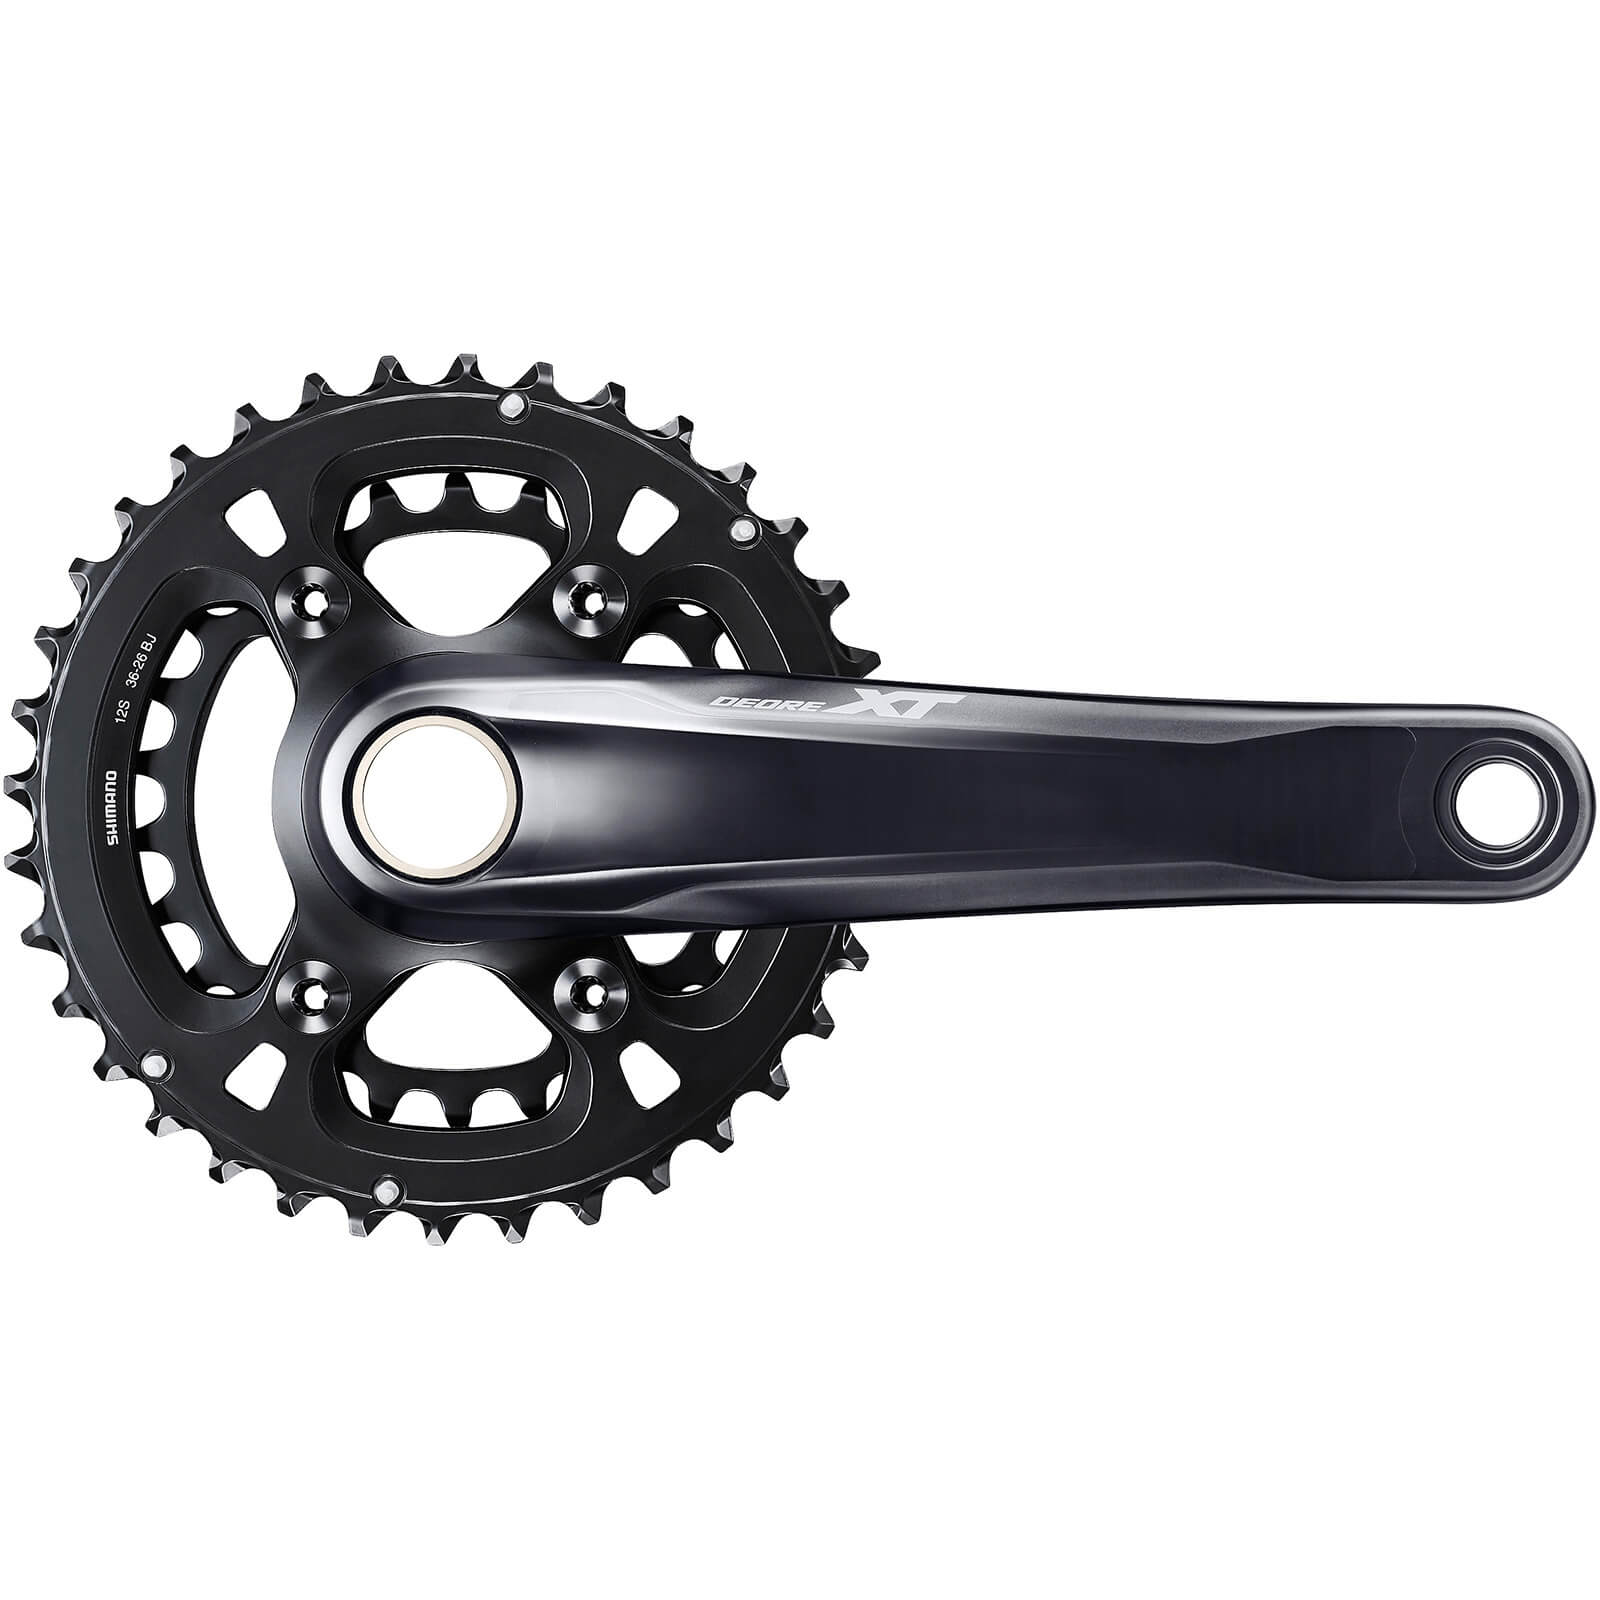 Shimano Deore XT M8120 Chainset - 36/26 - 170mm